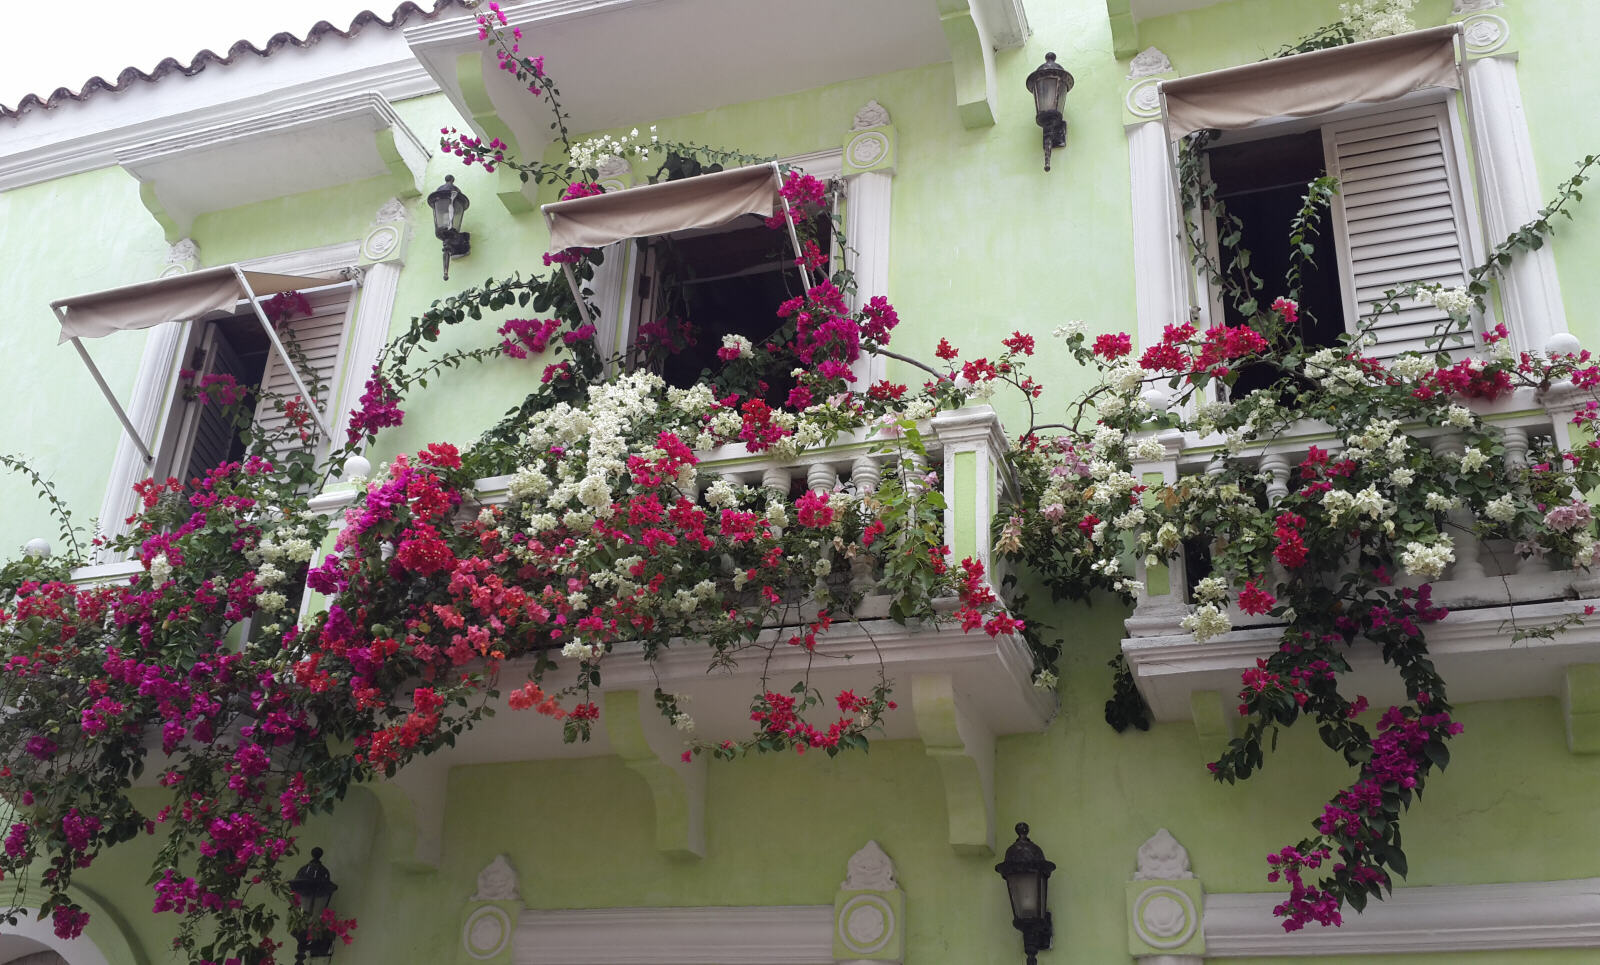 Flower-filled balcony in Cartagena, Colombia